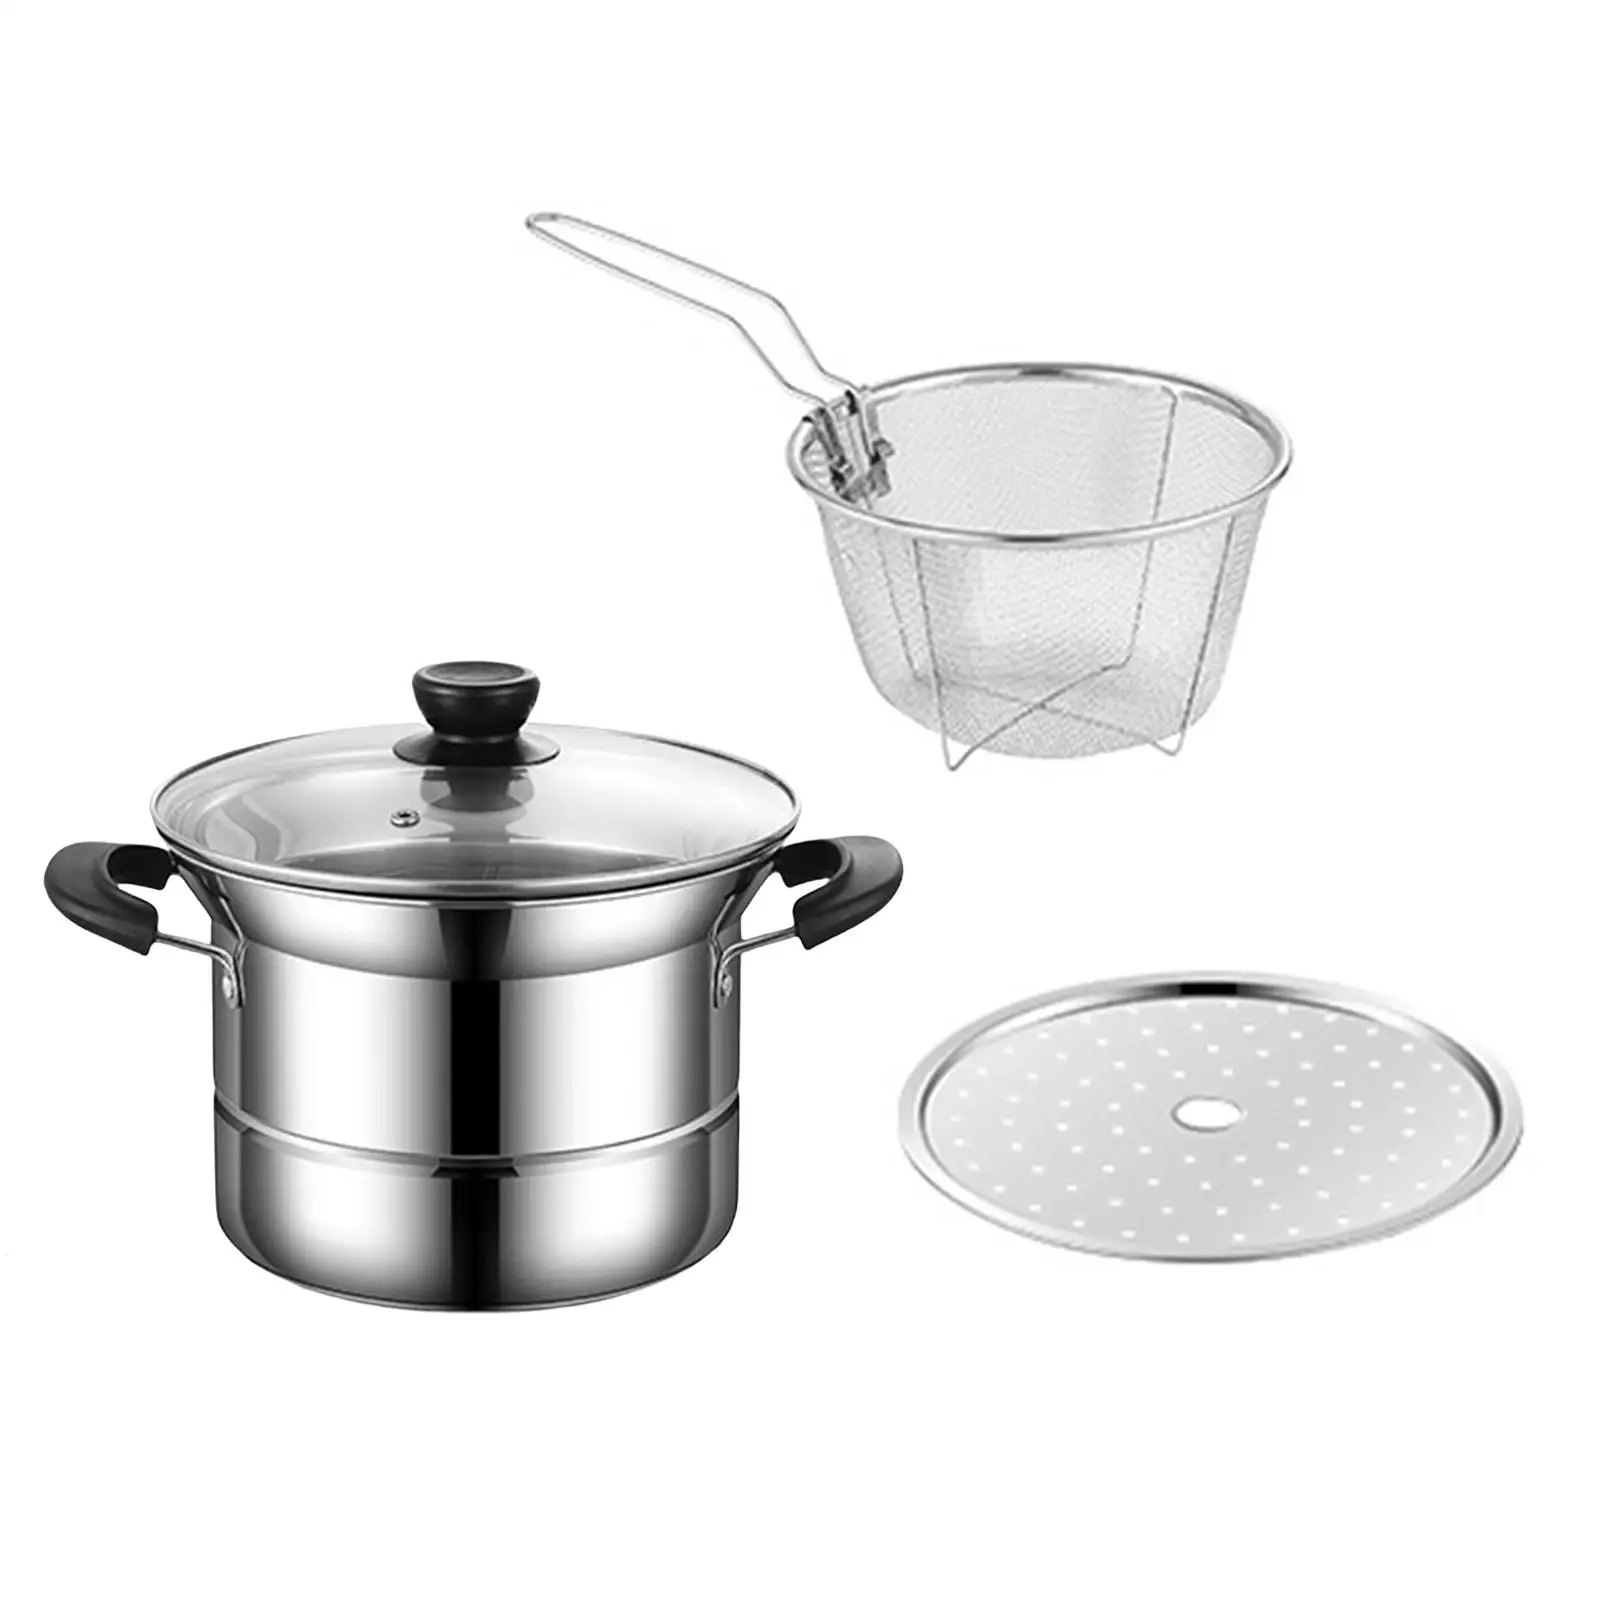 Stainless Steel Sauce Pan Milk Pot Multipurpose Cookware Sets Utensils Universal Small Pot for Camping Dining Room Picnic